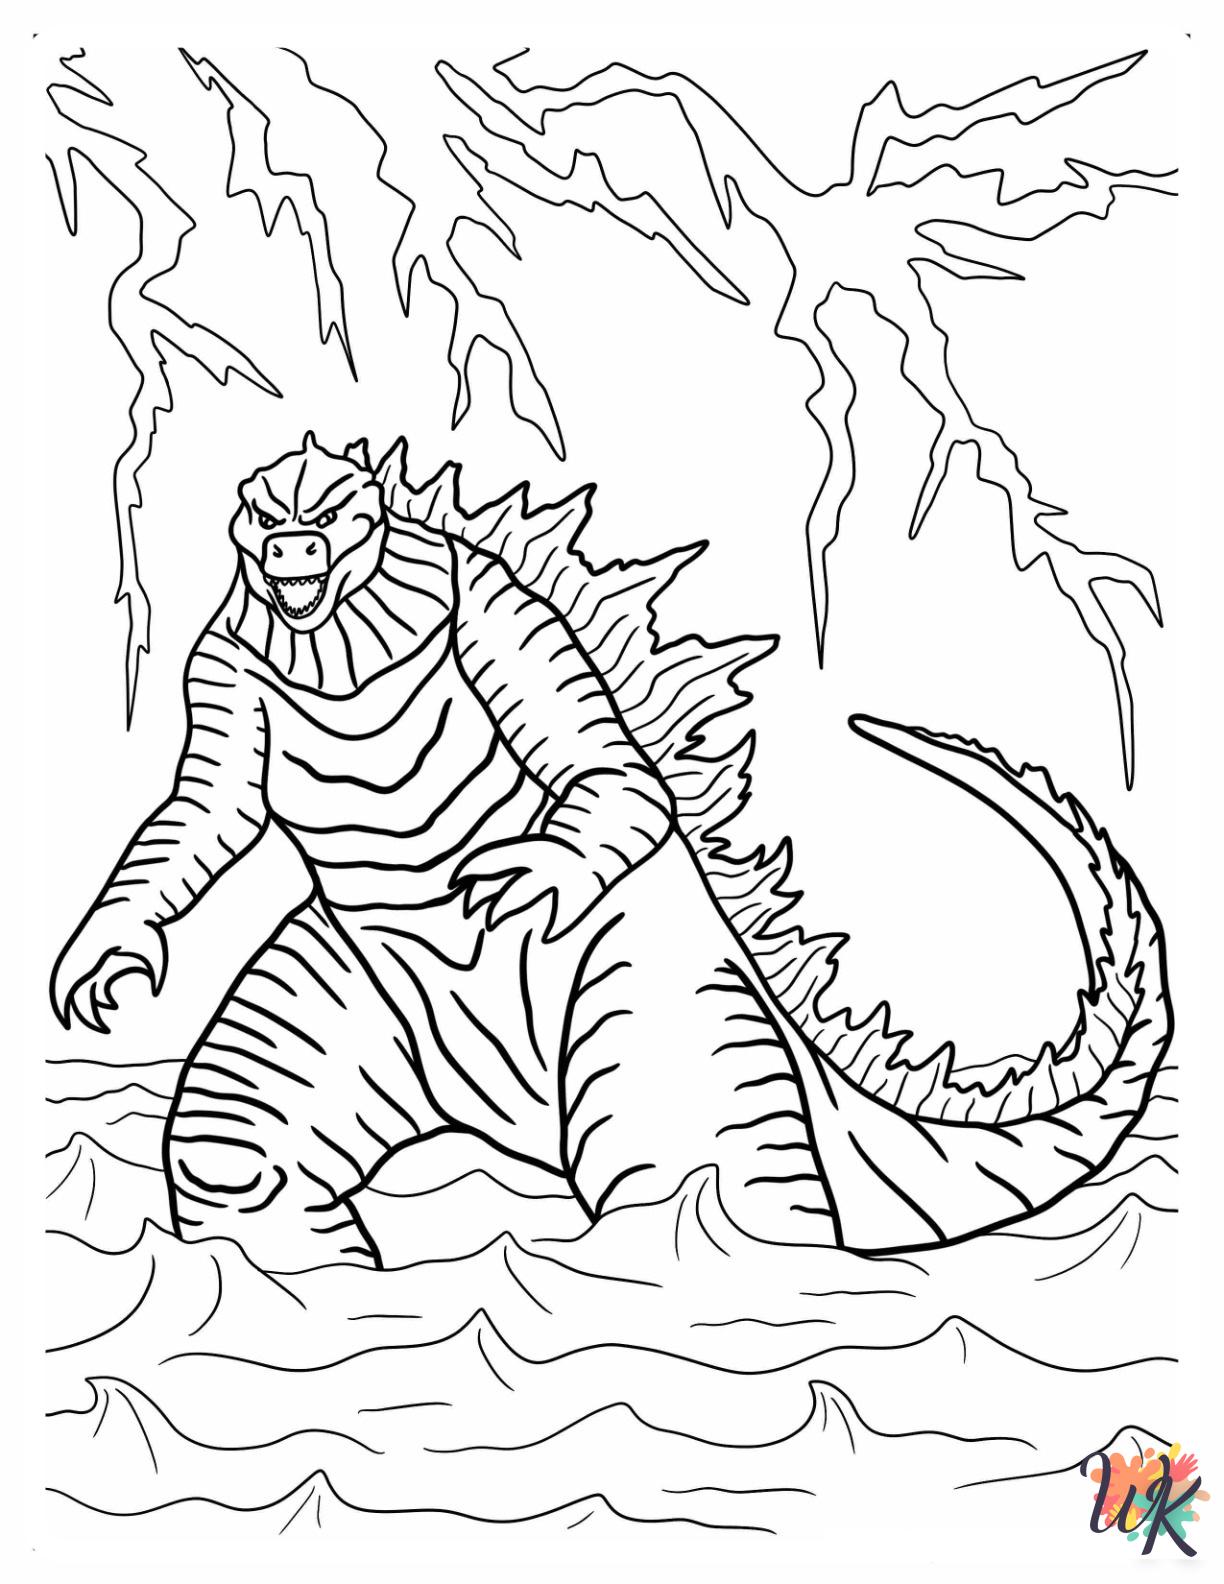 merry Godzilla coloring pages